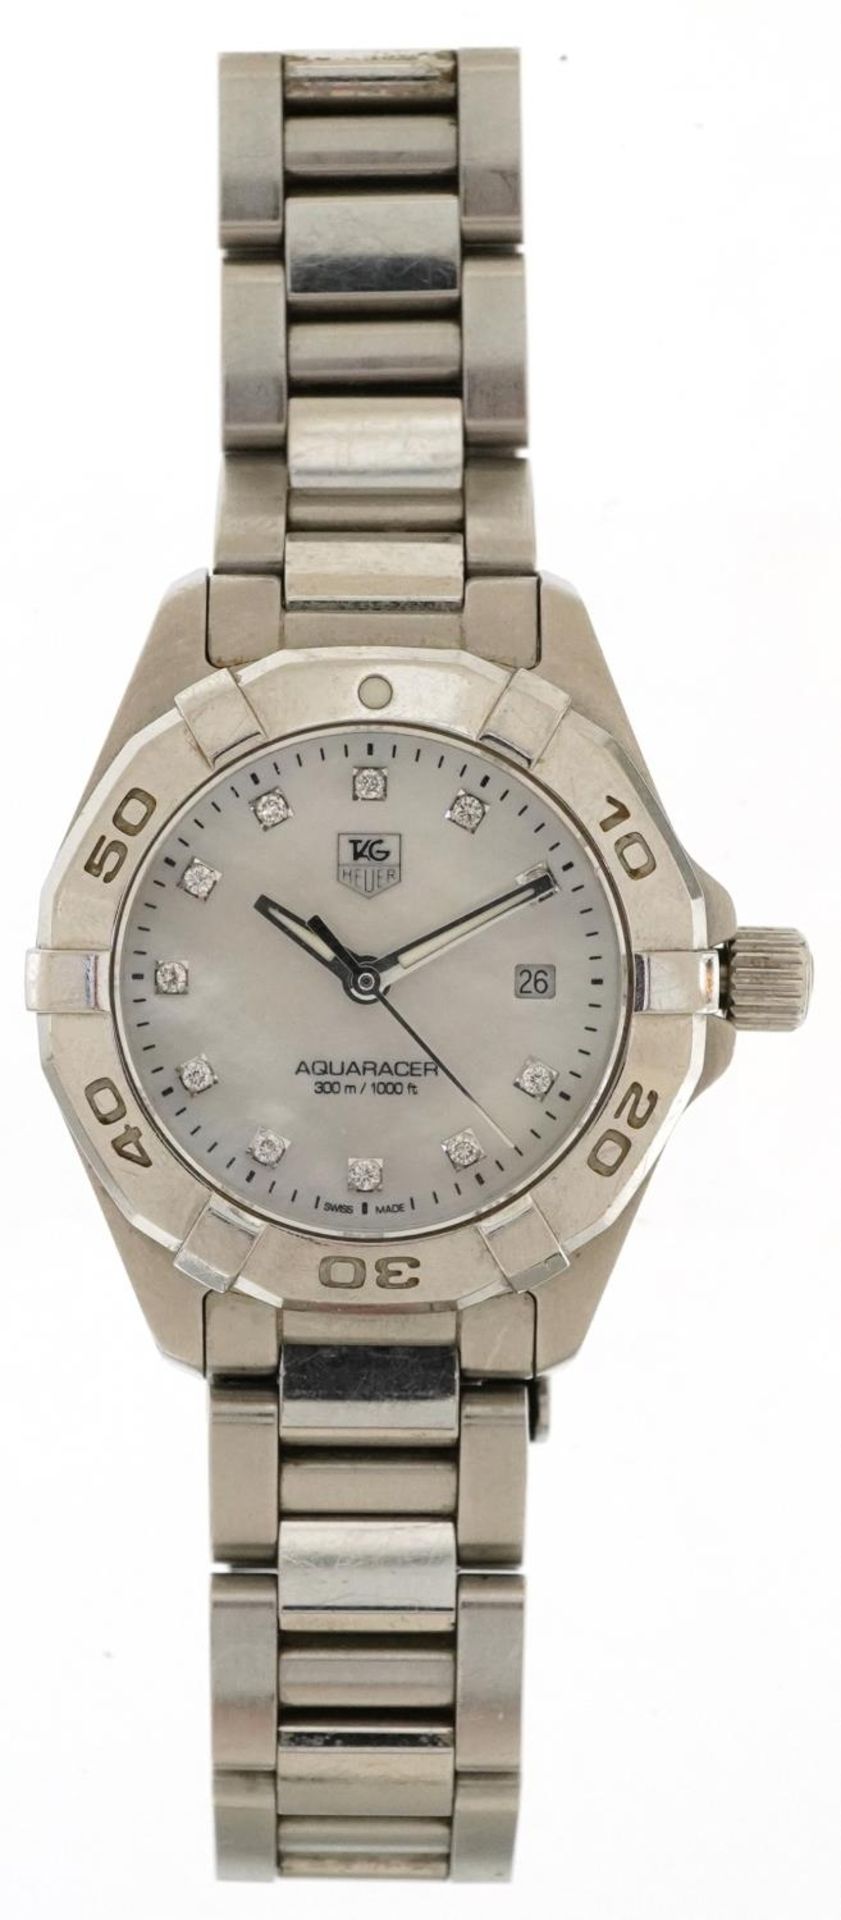 Tag Heuer, ladies Tag Heuer Aquaracer wristwatch having a diamond set mother of pearl dial with date - Image 2 of 9